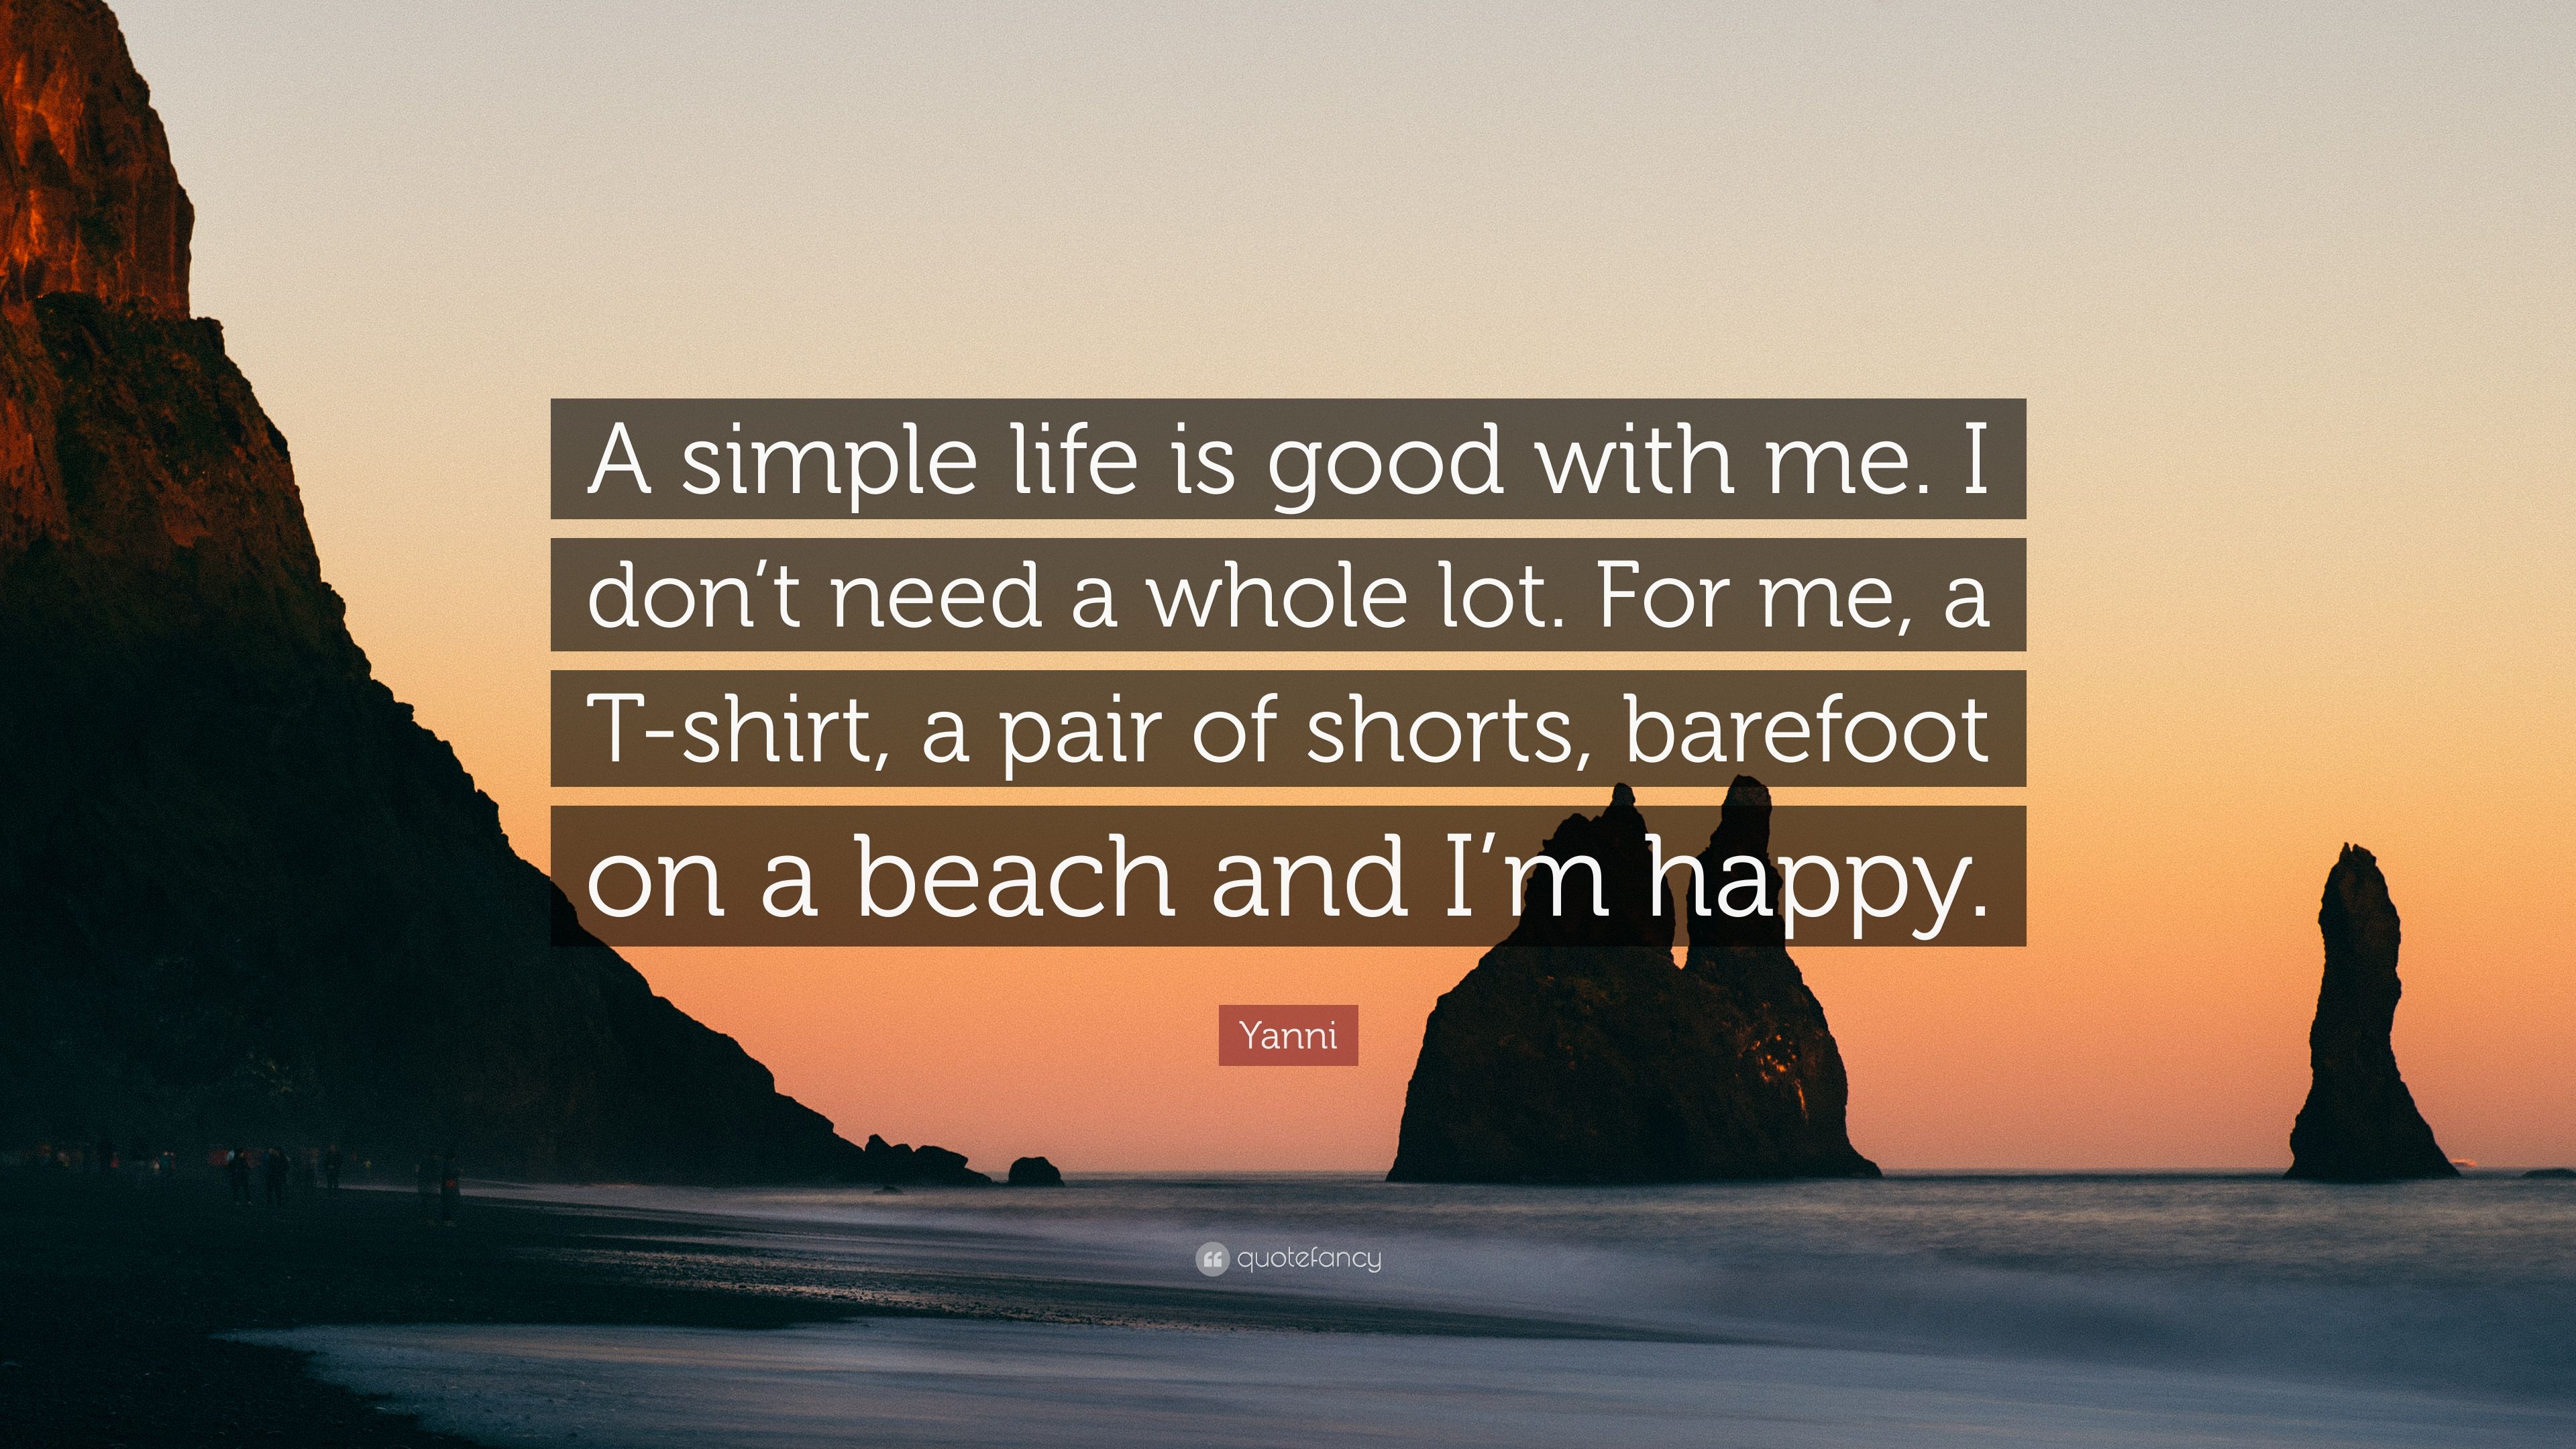 Yanni Quote: “A simple life is good with me. I don't need a whole